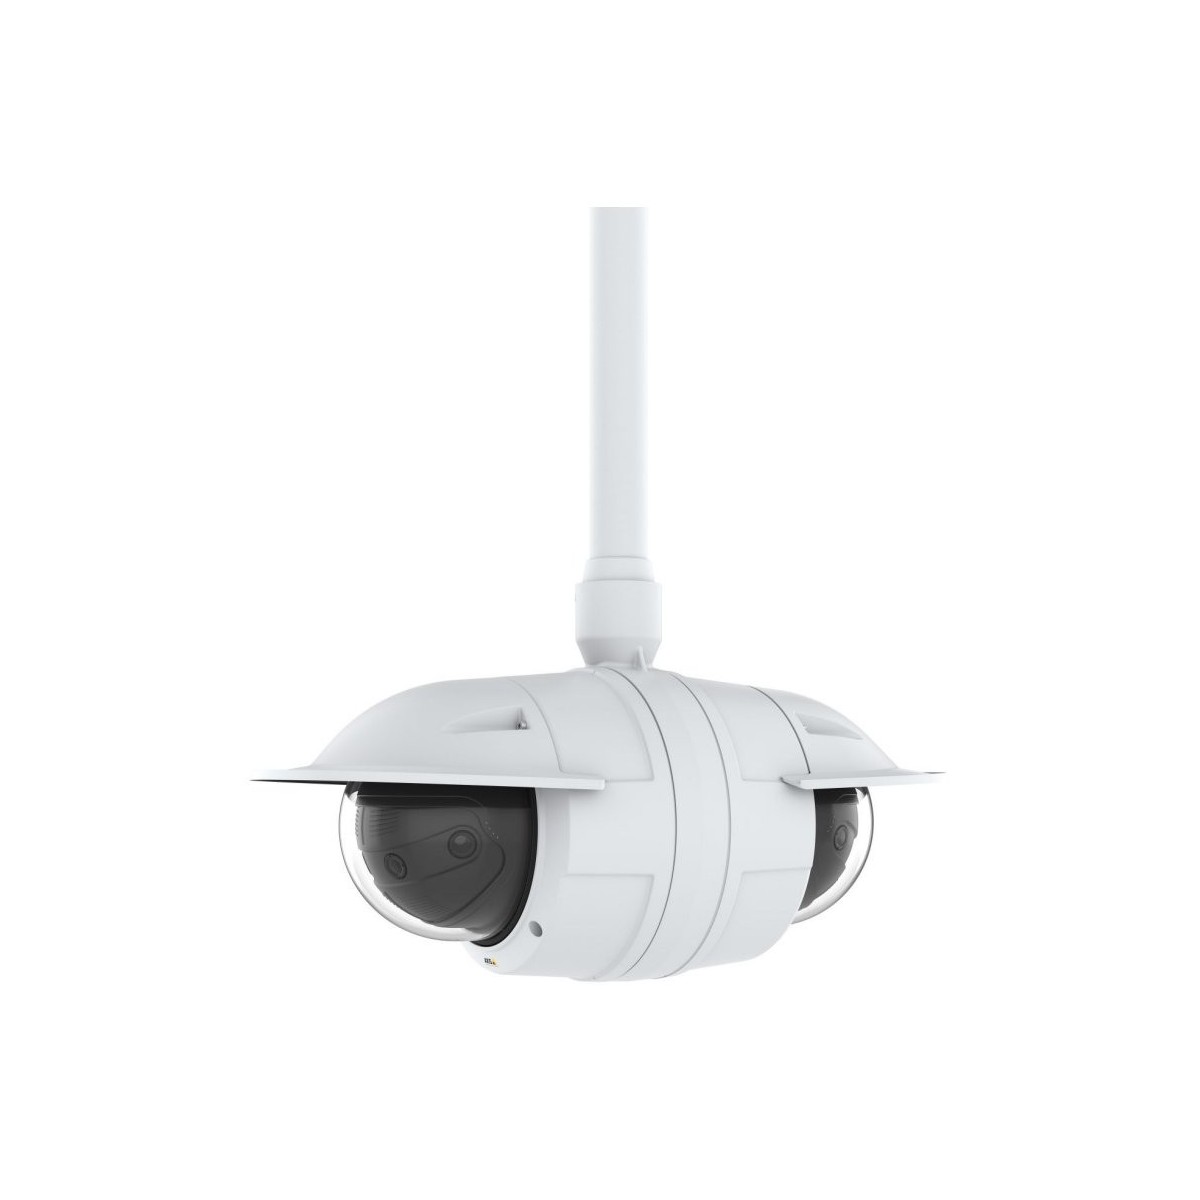 Axis P3807-PVE - IP security camera - Outdoor - Wired - Simplified Chinese - Traditional Chinese - German - English - Spanish - 